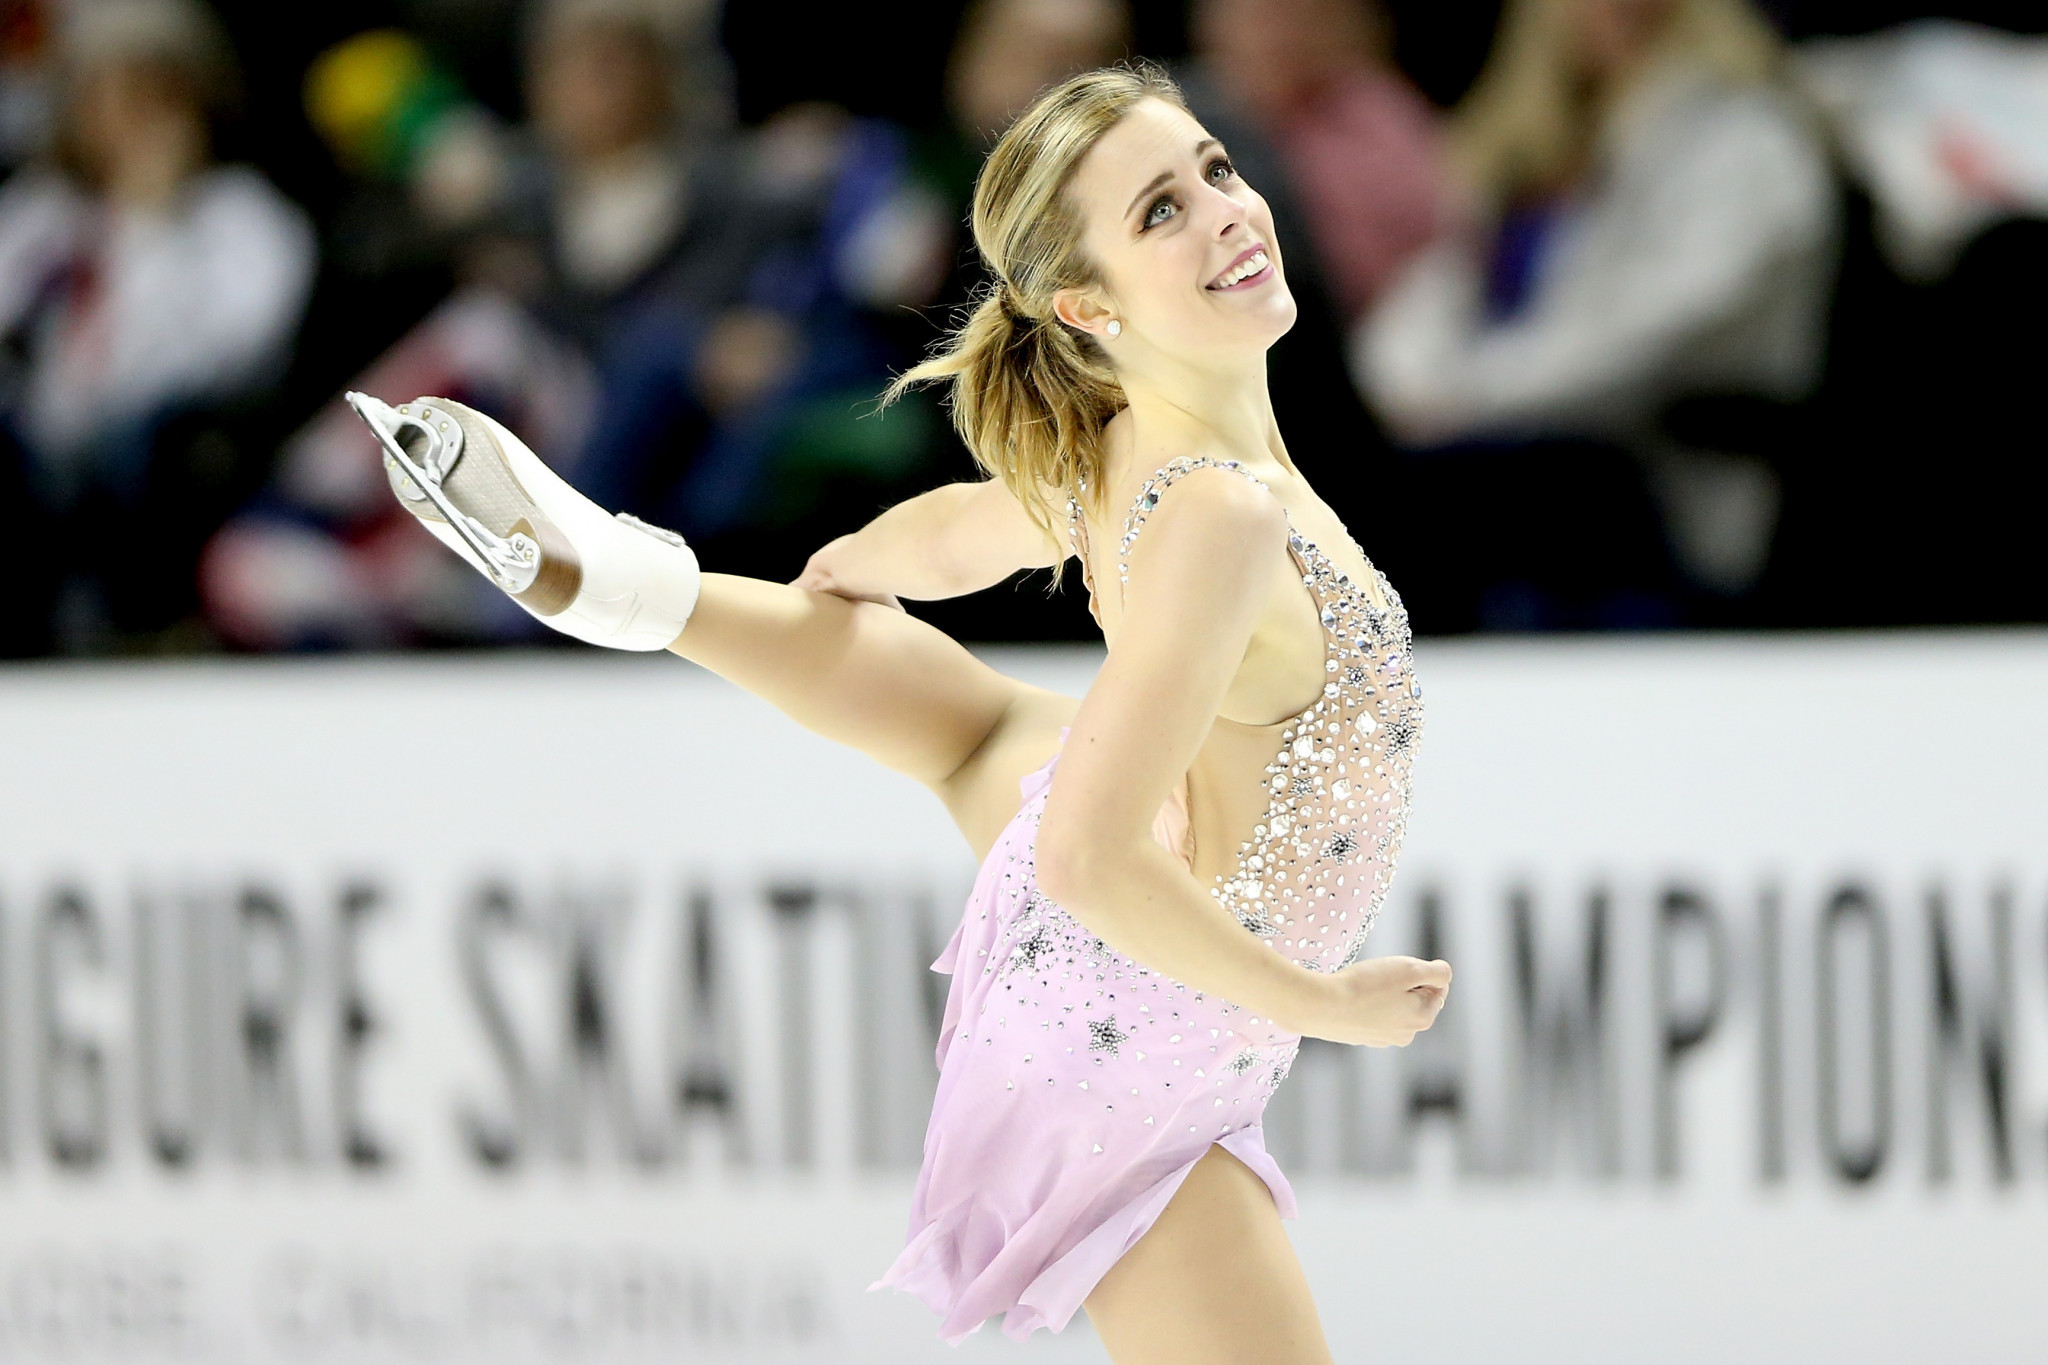 Olympic figure skater Ashley Wagner told USA TODAY John Coughlin sexually abused her in June 2008 ©Getty Images